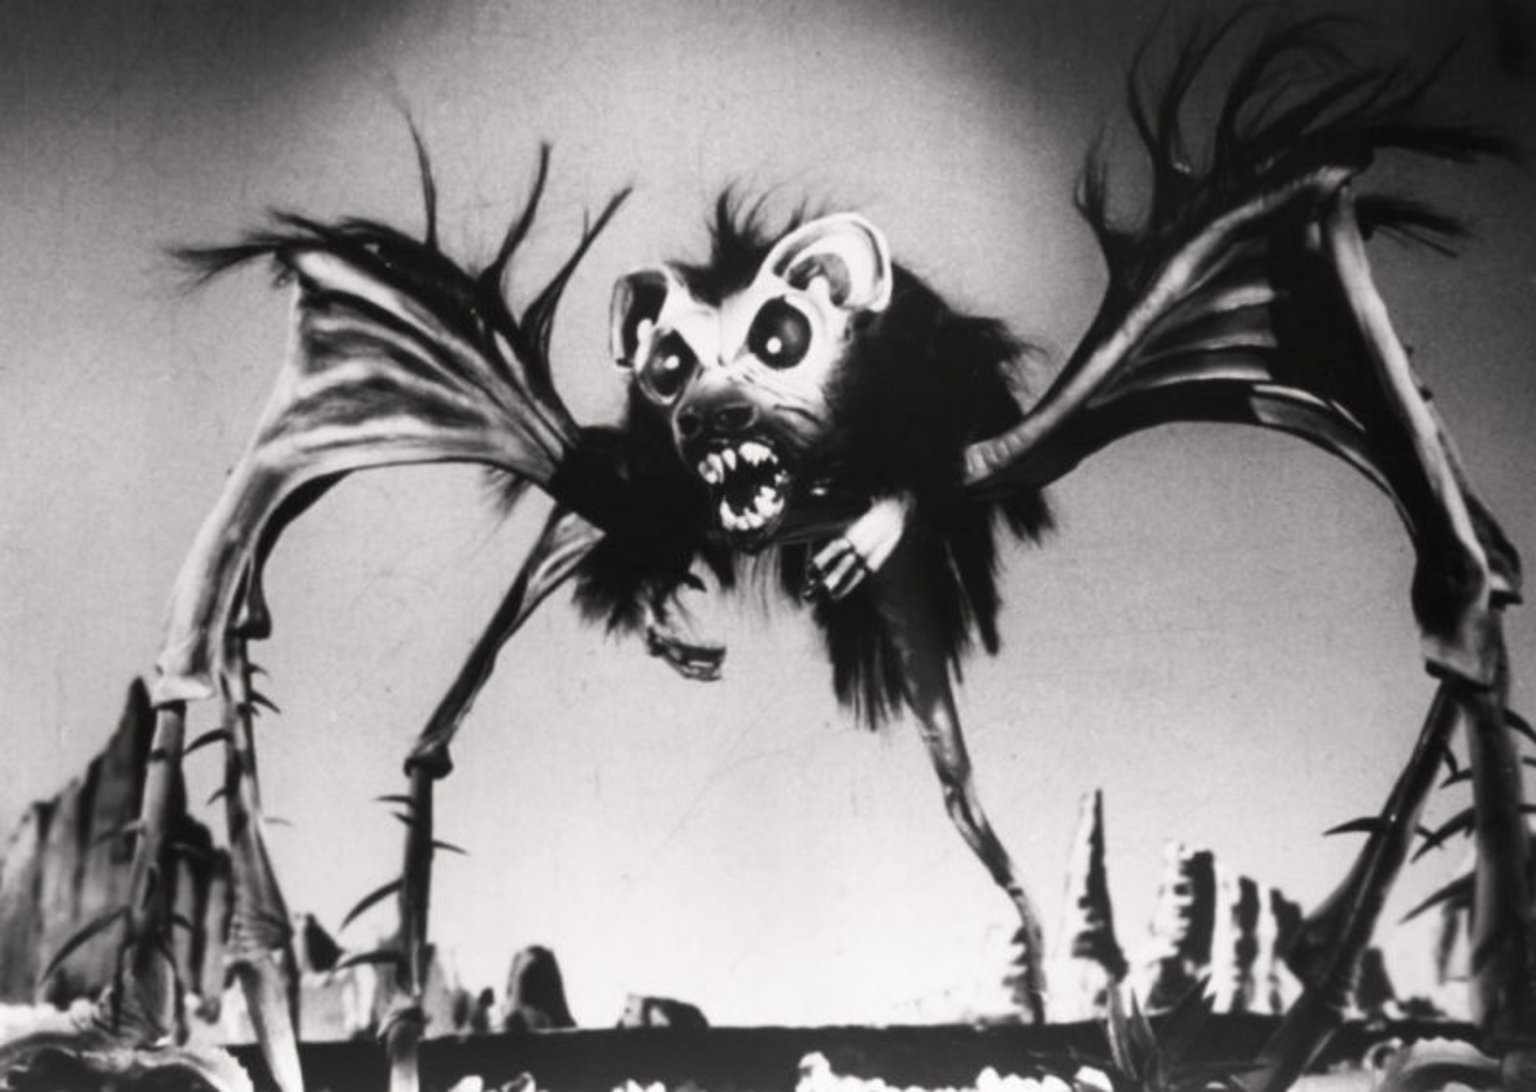 The Bat-Rat-Spider on the Martian surface in The Angry Red Planet (1959)